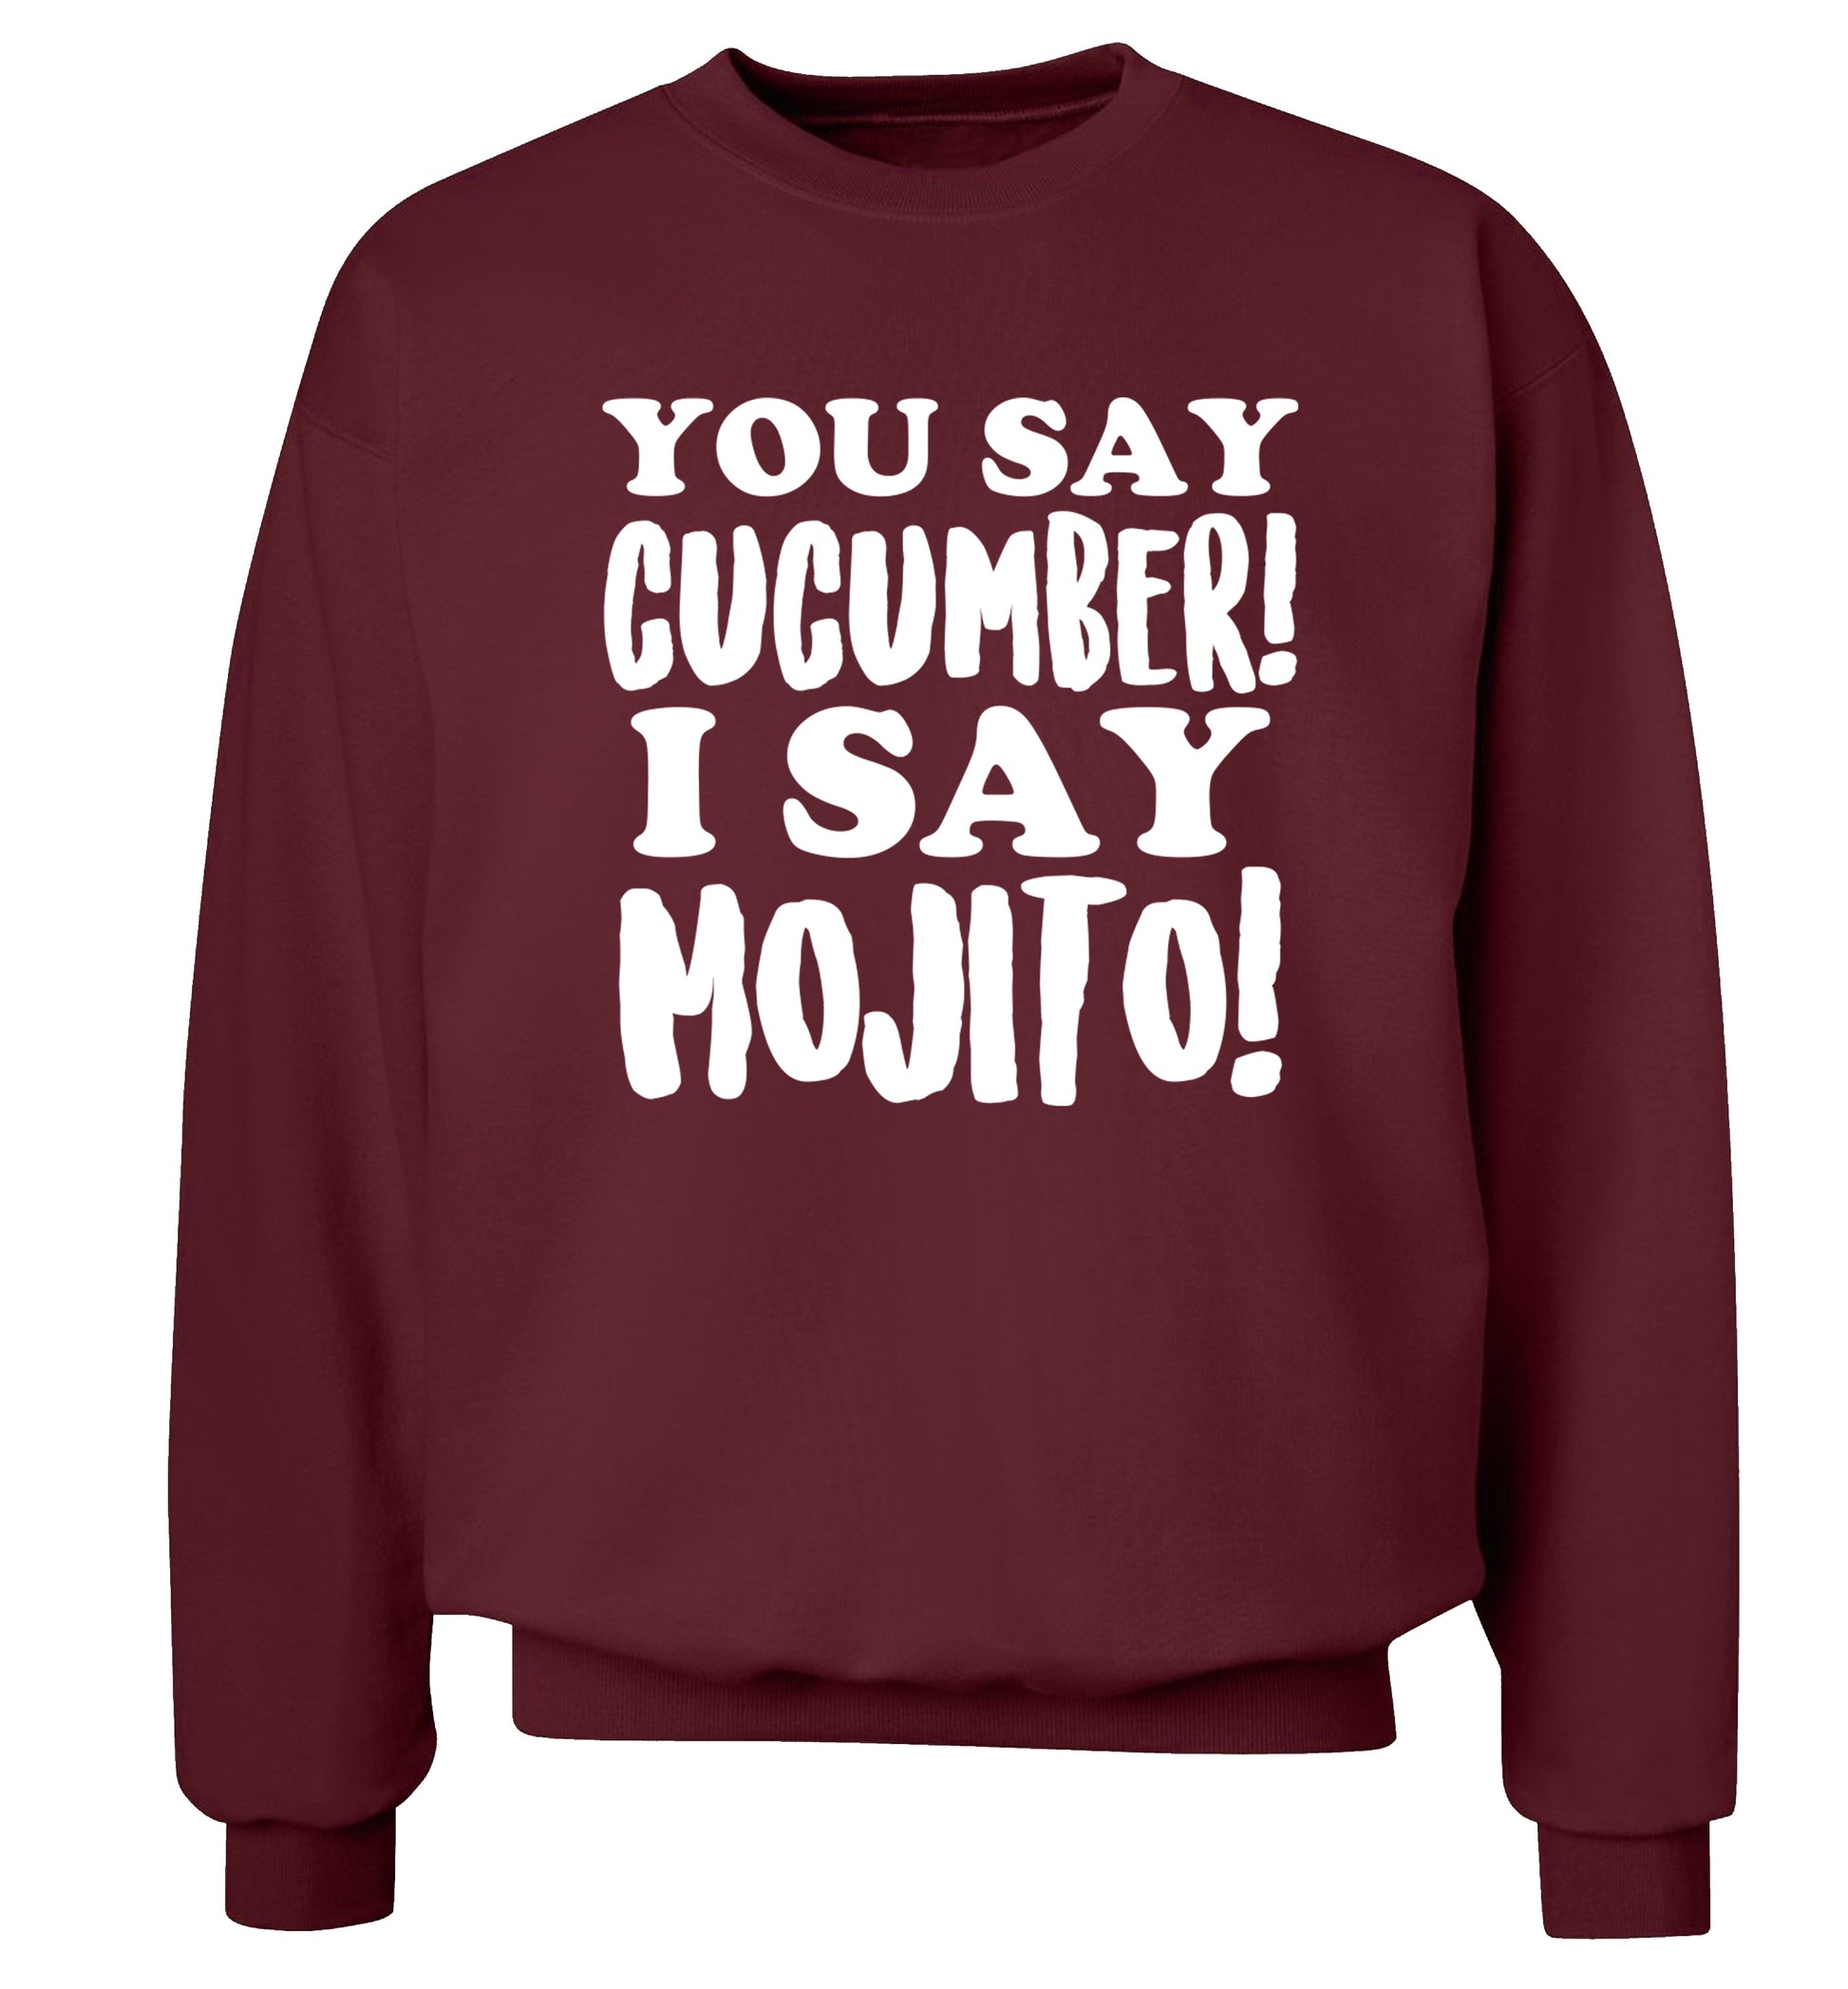 You say cucumber I say mojito! Adult's unisex maroon Sweater 2XL